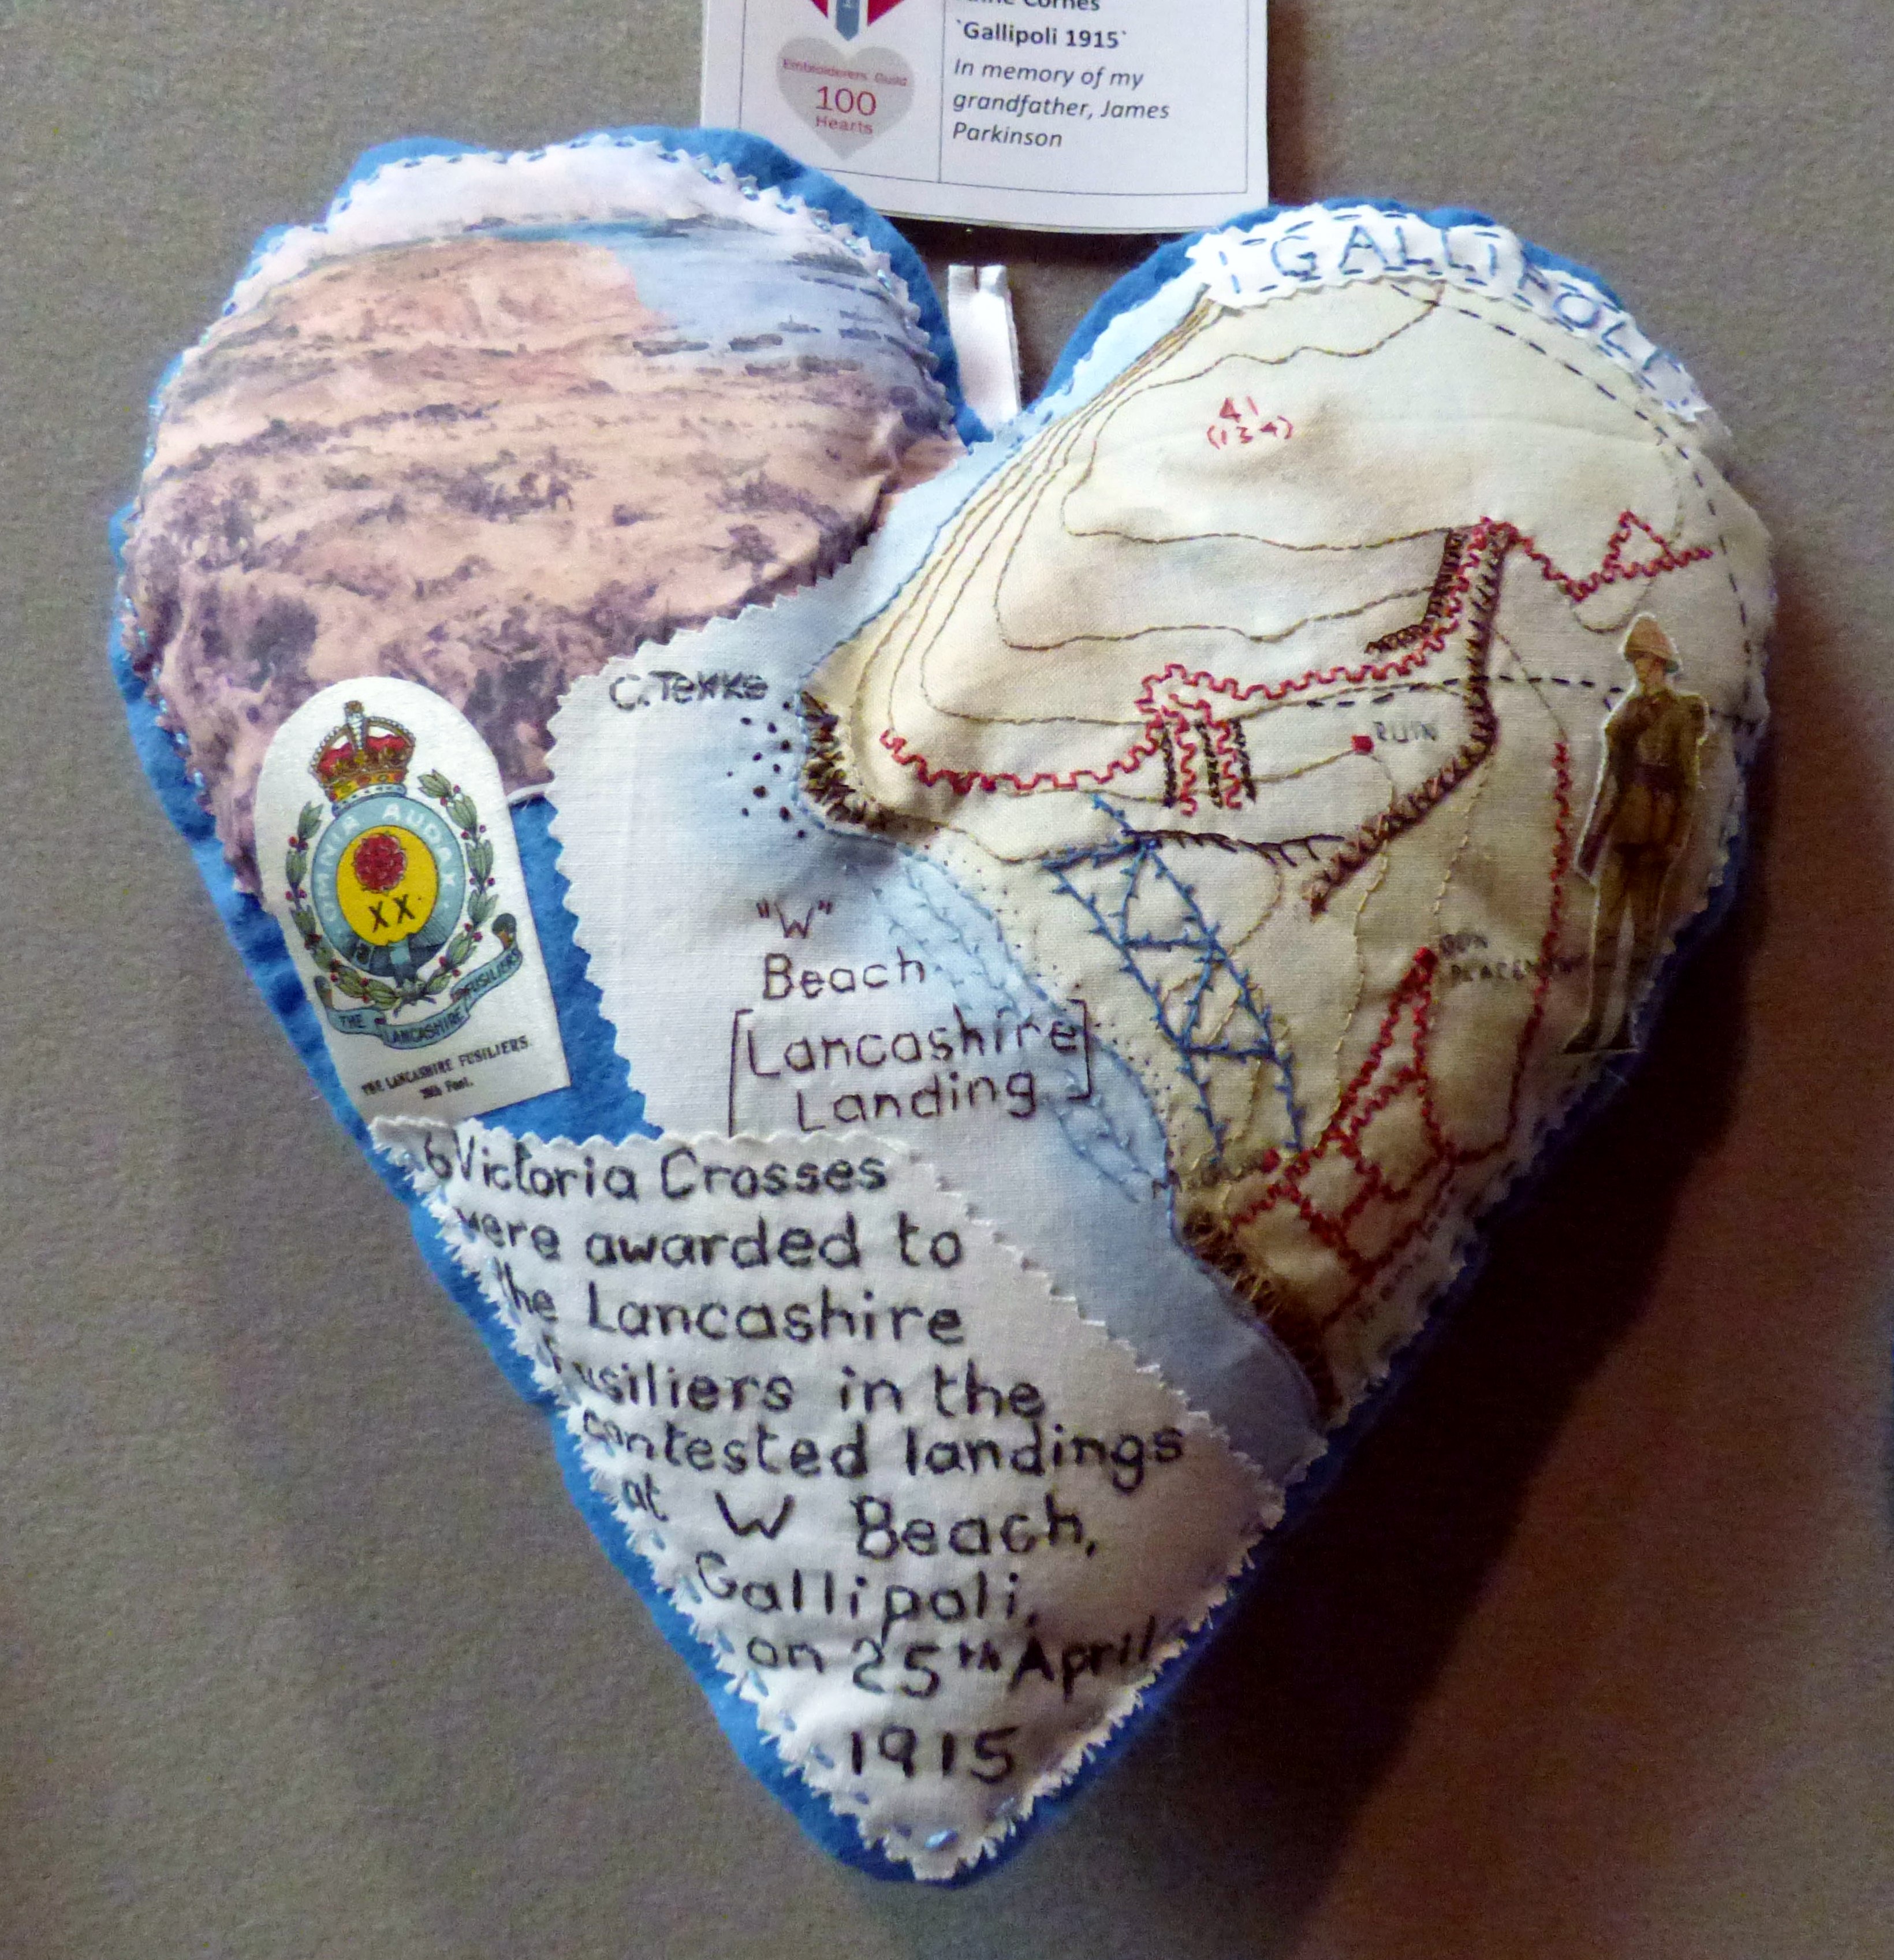 GALLIPOLI 1915 by Anne Cornes, in memory of my grandfather James Parkinson, 100 Hearts exhibition, Liverpool Cathedral, Sept 2018